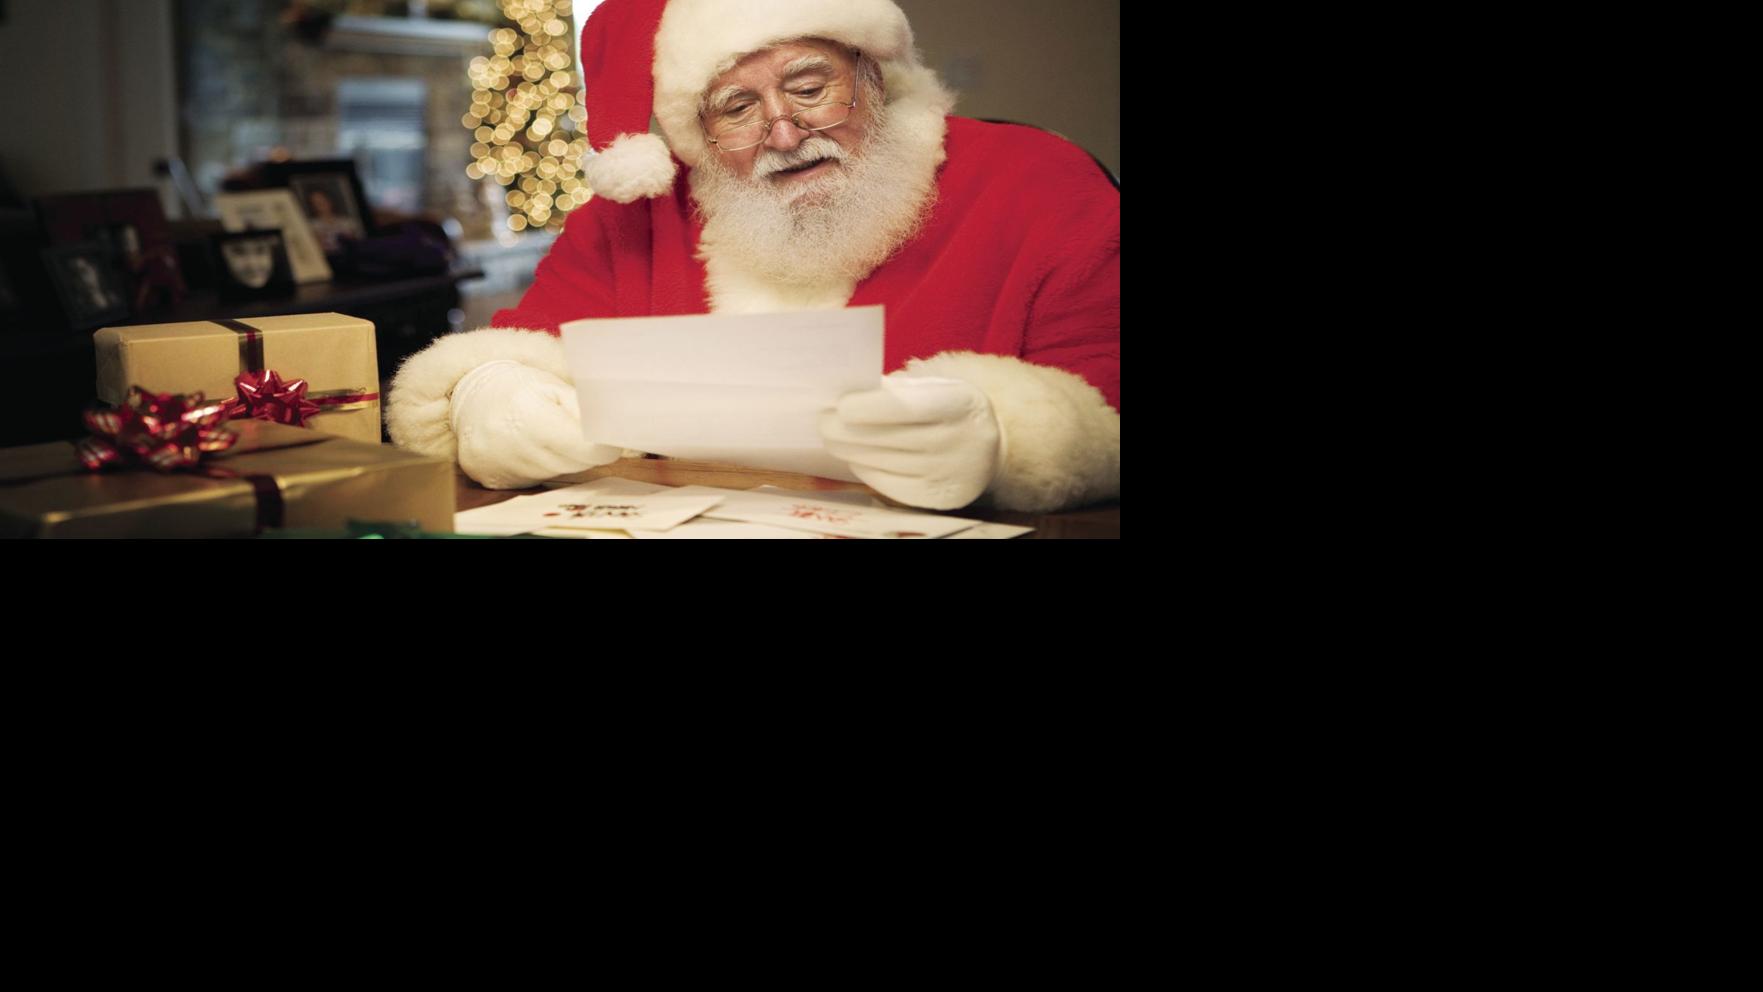 Find Your Child S List Letters To Santa 2018 Local Herald Review Com - pin by alexander williams on roblox funny and cool pin s roblox